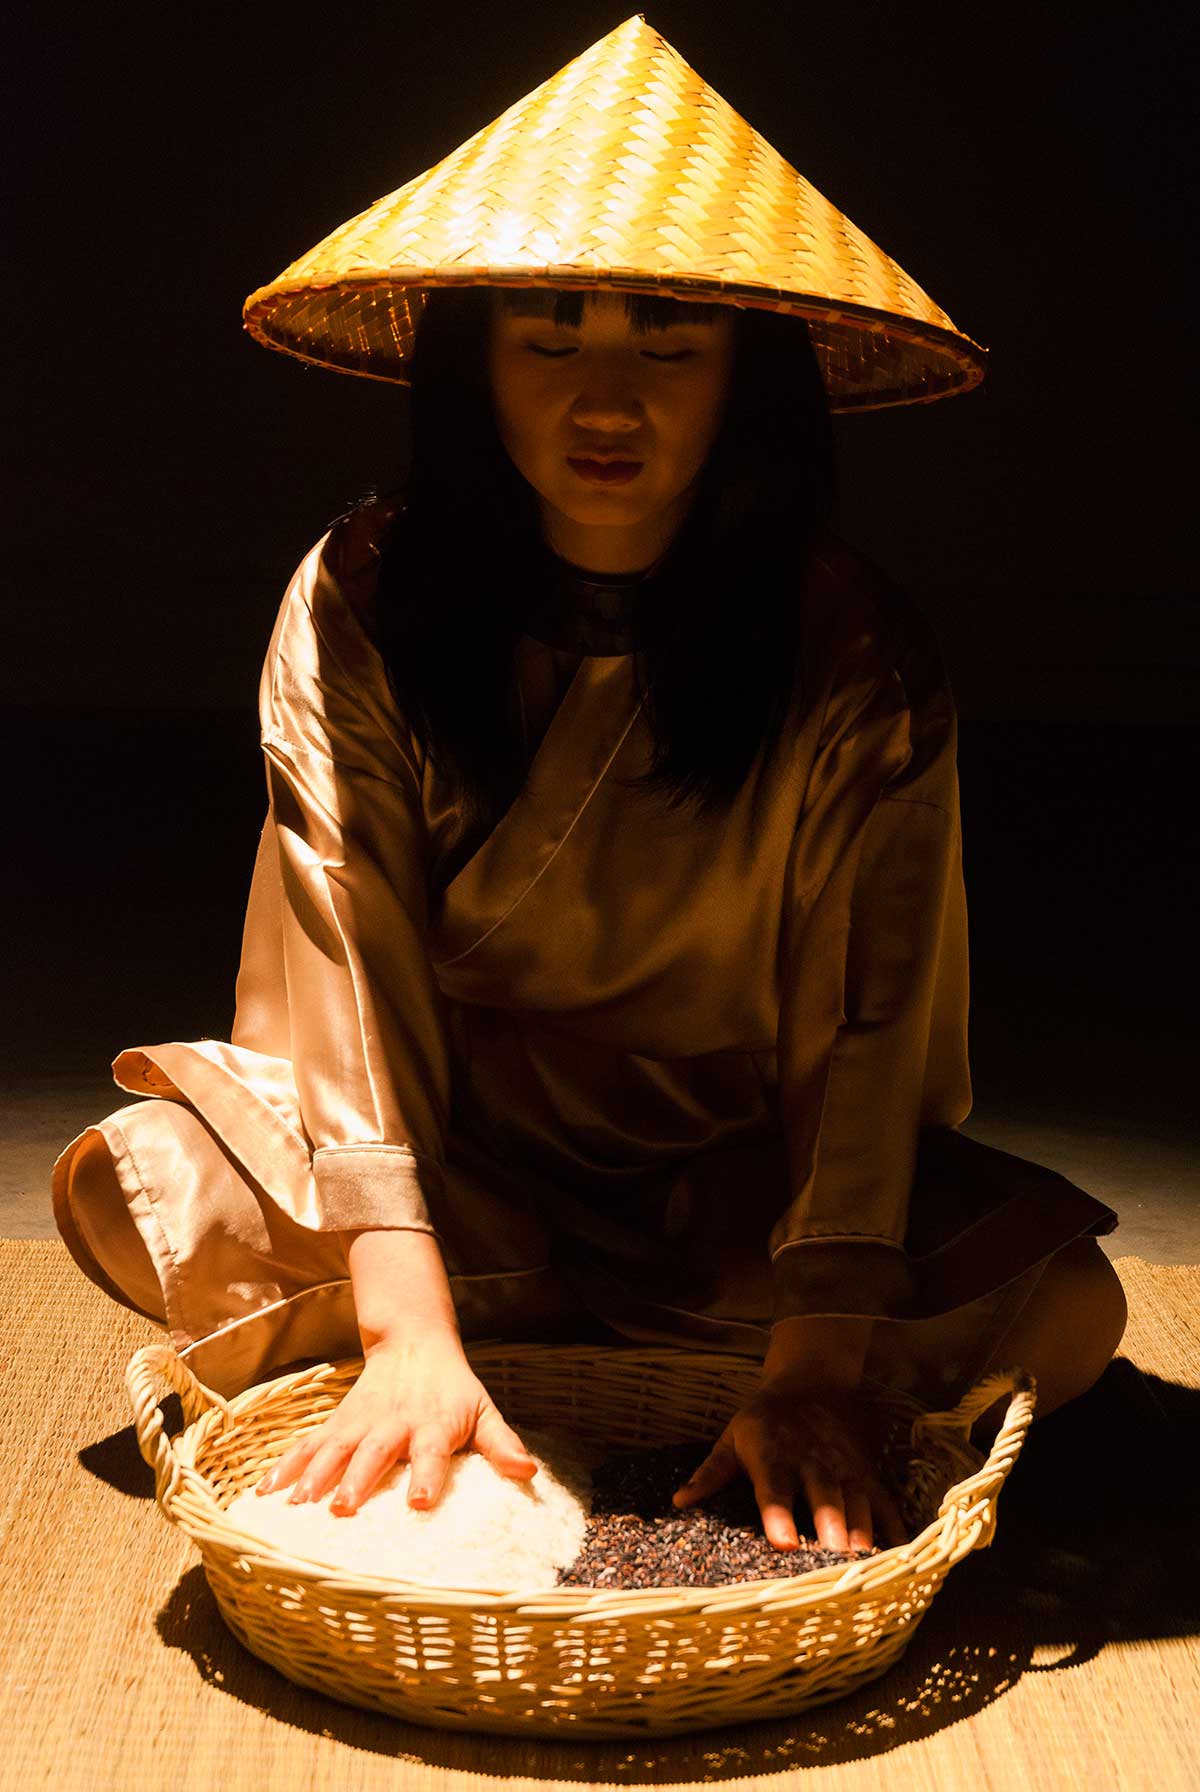 Chun Hua Catherine Dong closes her eyes, sits on a mat and gently touches the black and white rice in front of her, she is ready to perform her rice performance